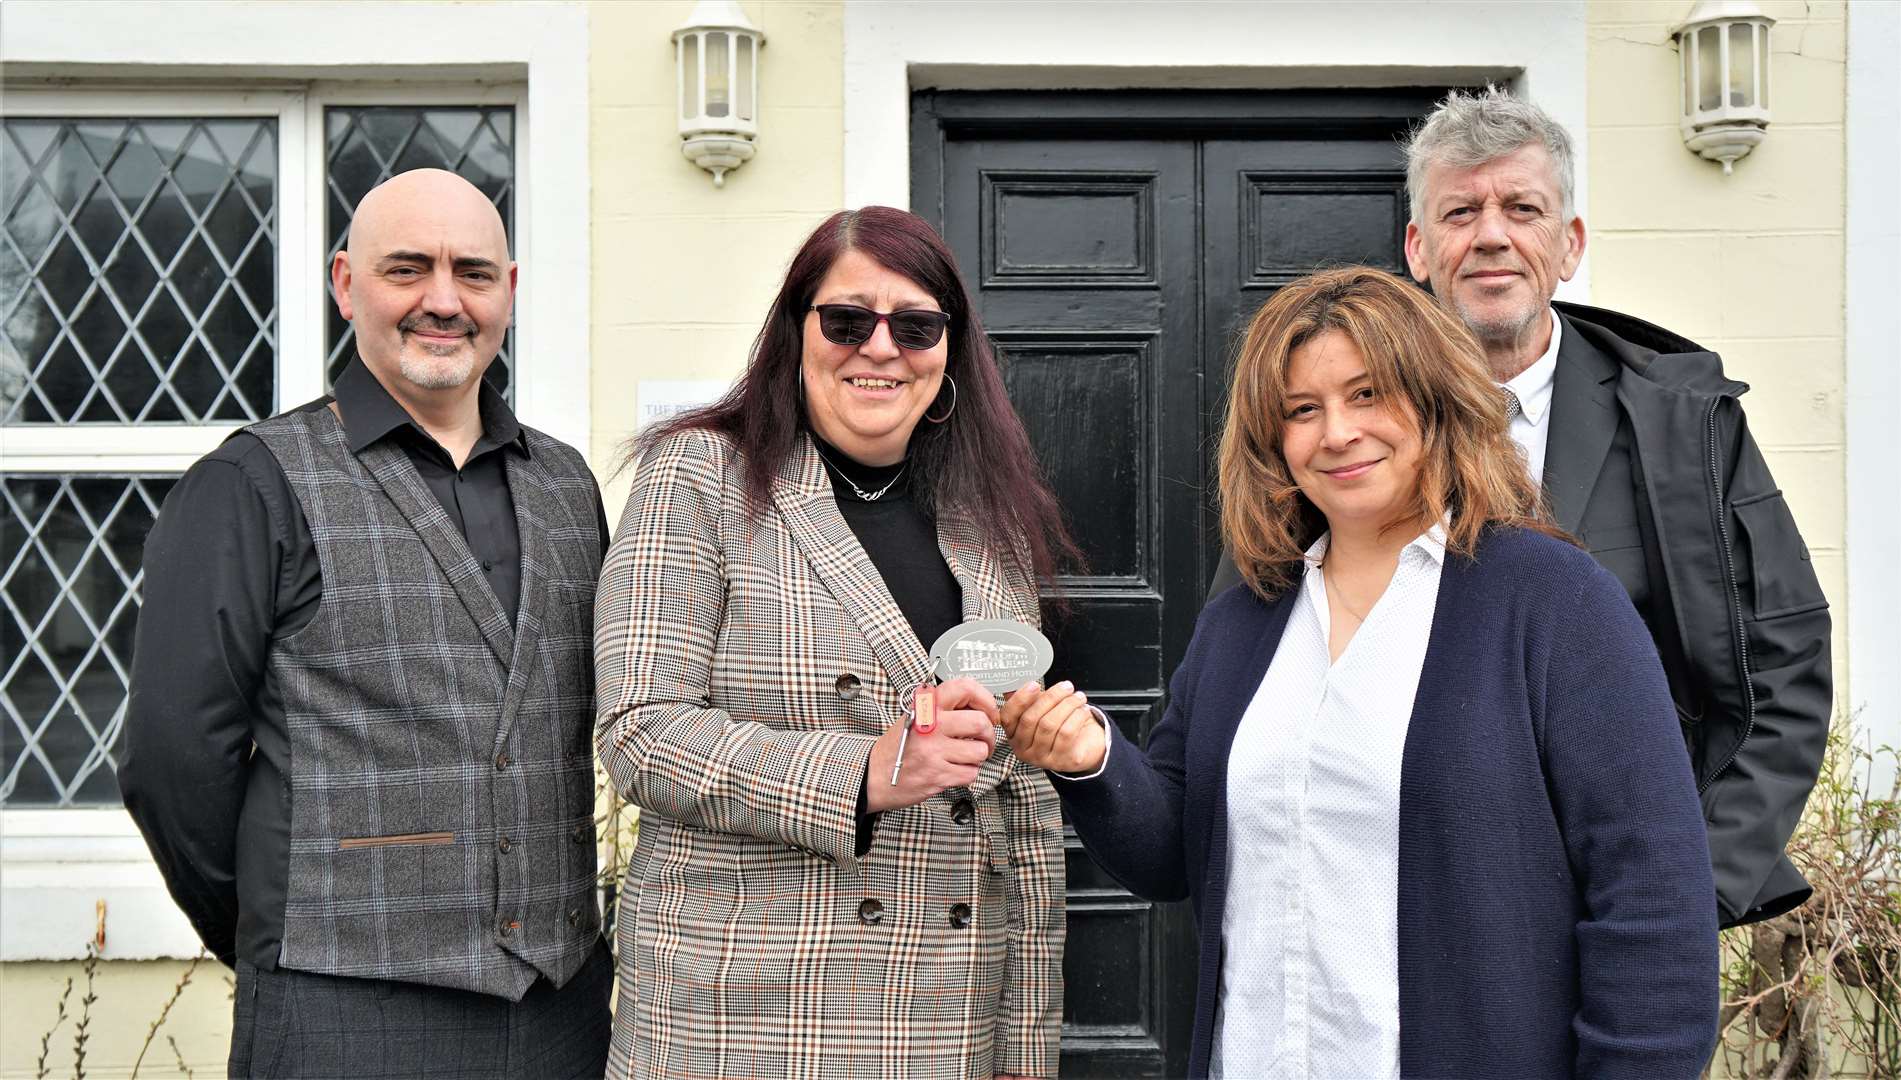 Previous owners of the Portland Hotel Steven Swan and his sister Sharn, at left, hand over the hotel keys to Jeff Harling and his wife Sam Mofttah. Picture: DGS